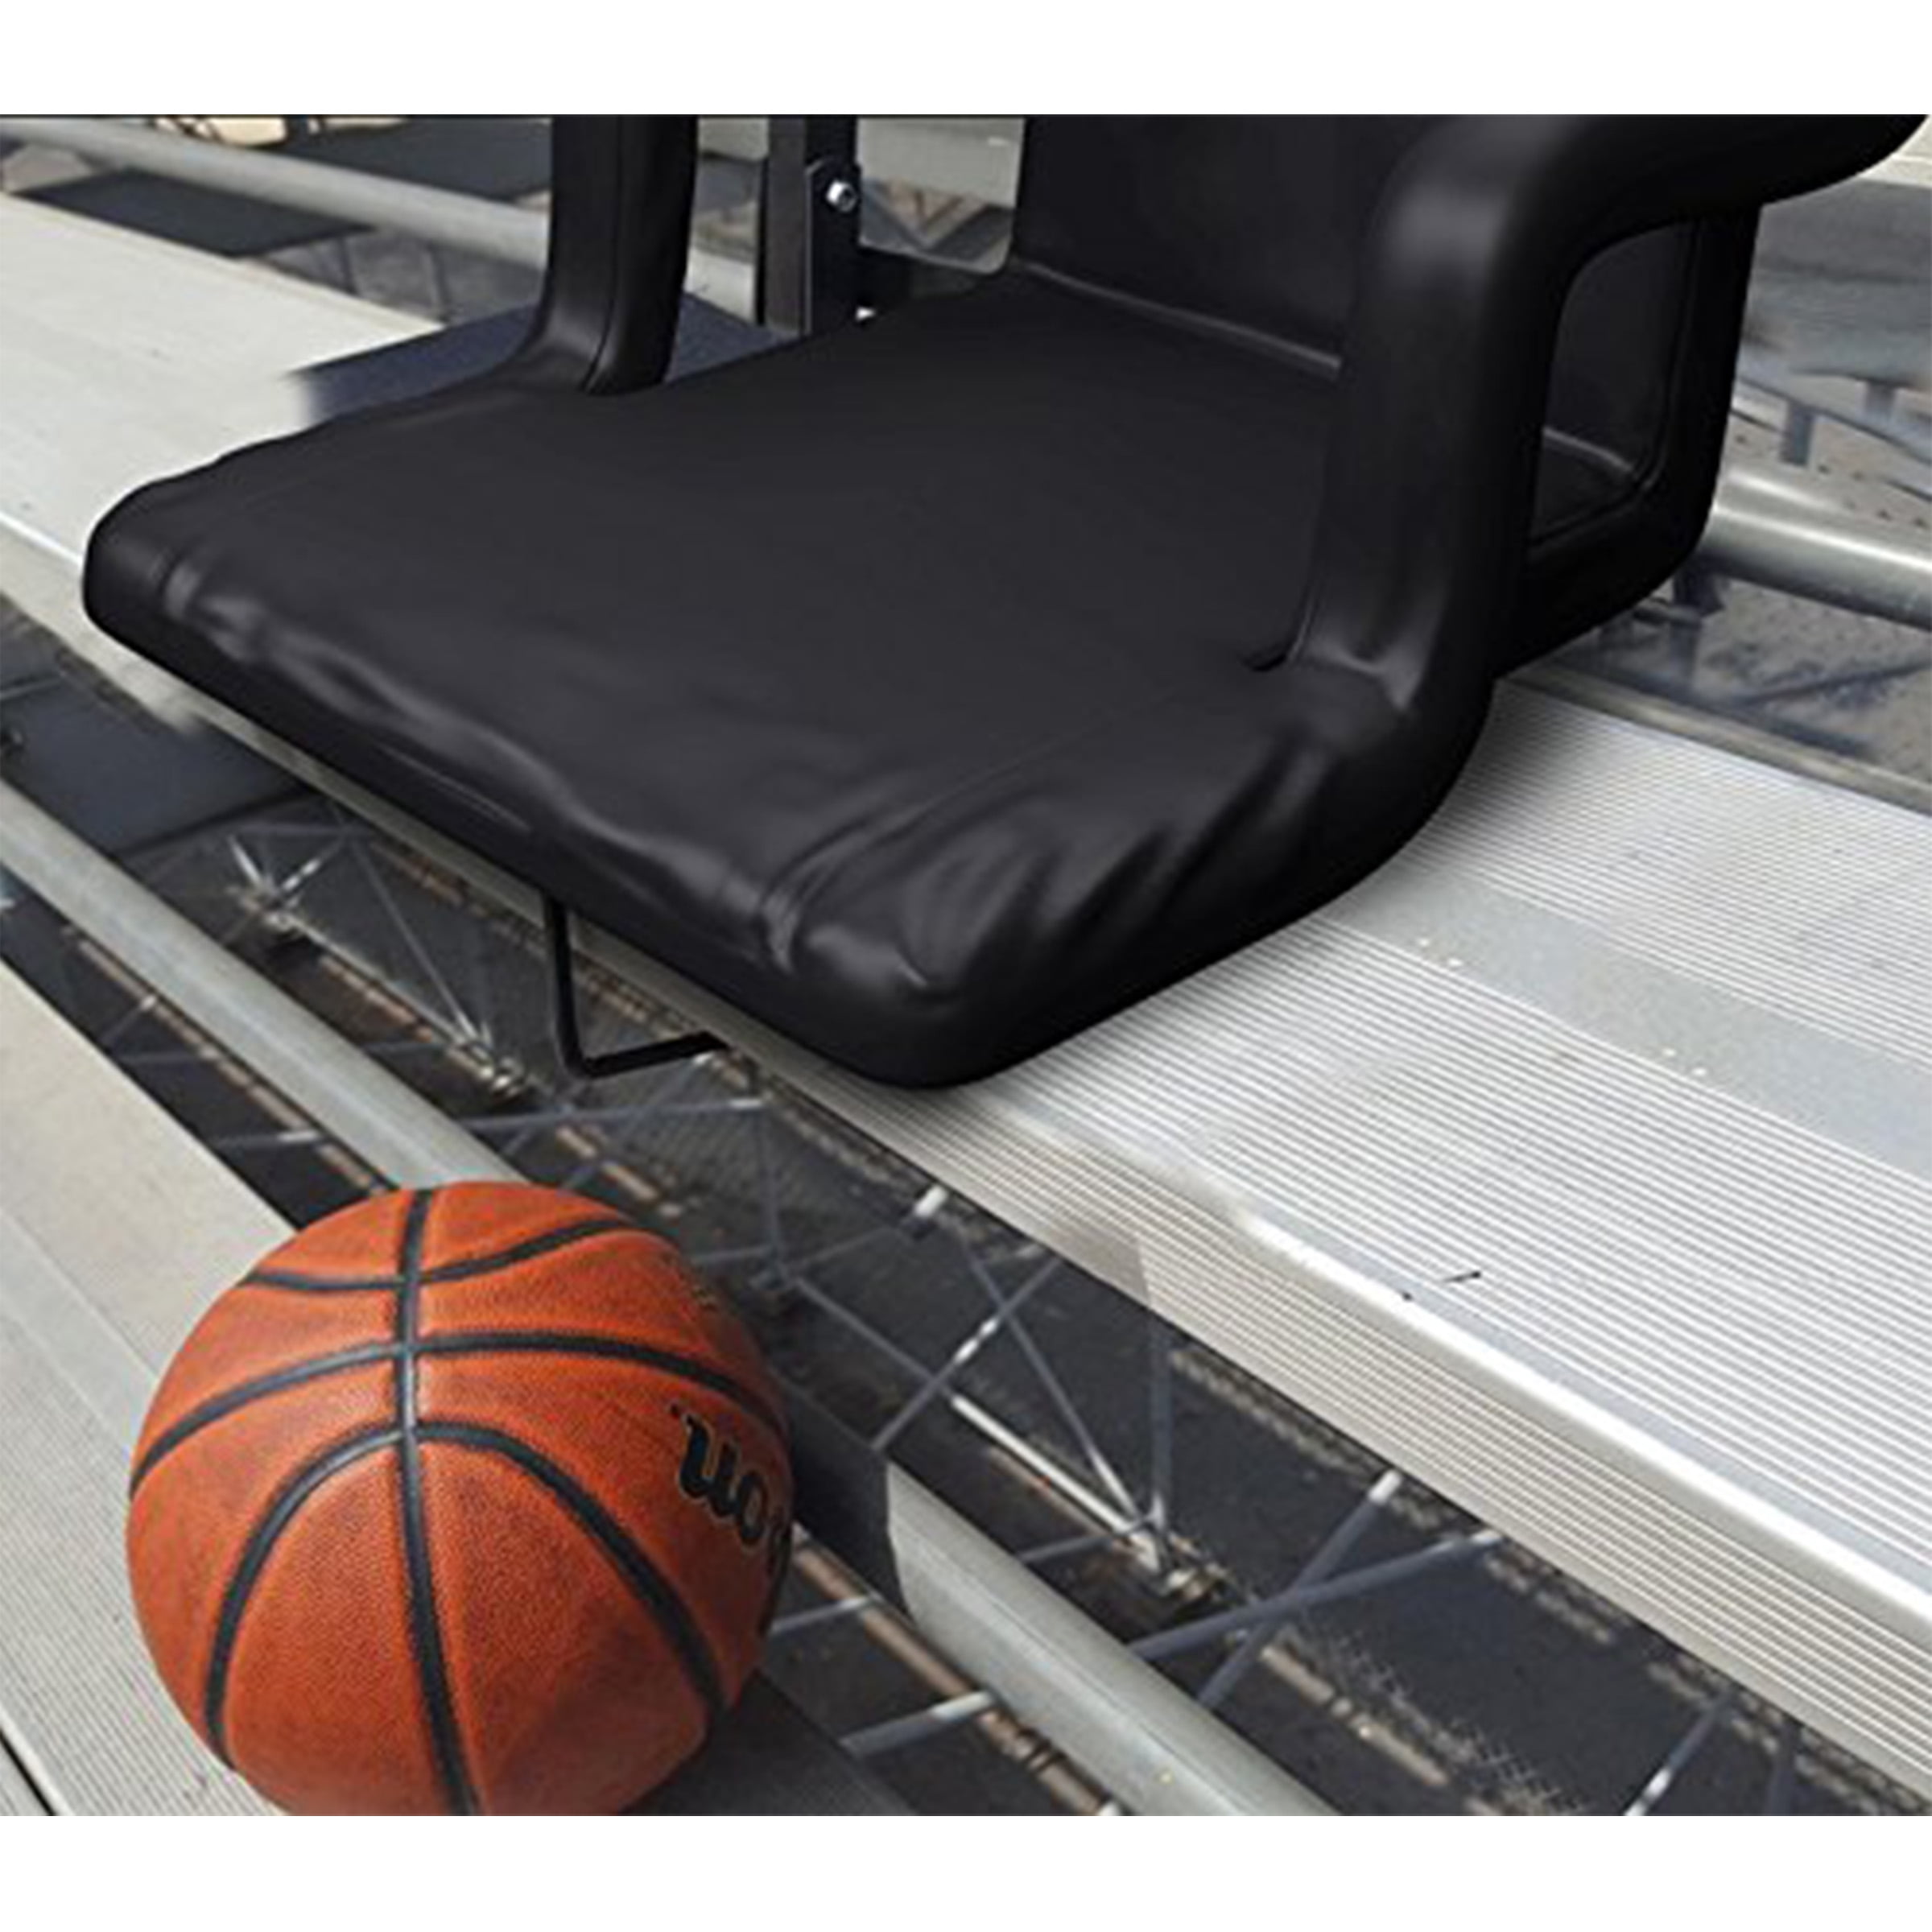 Dropship Stadium Seating For Bleachers, Heated Bleacher Seats With Backrest  Padded Cushion And Armrest For Adults And Child Portable Folding Extra Wide Football  Stadium Chairs With Back Support to Sell Online at